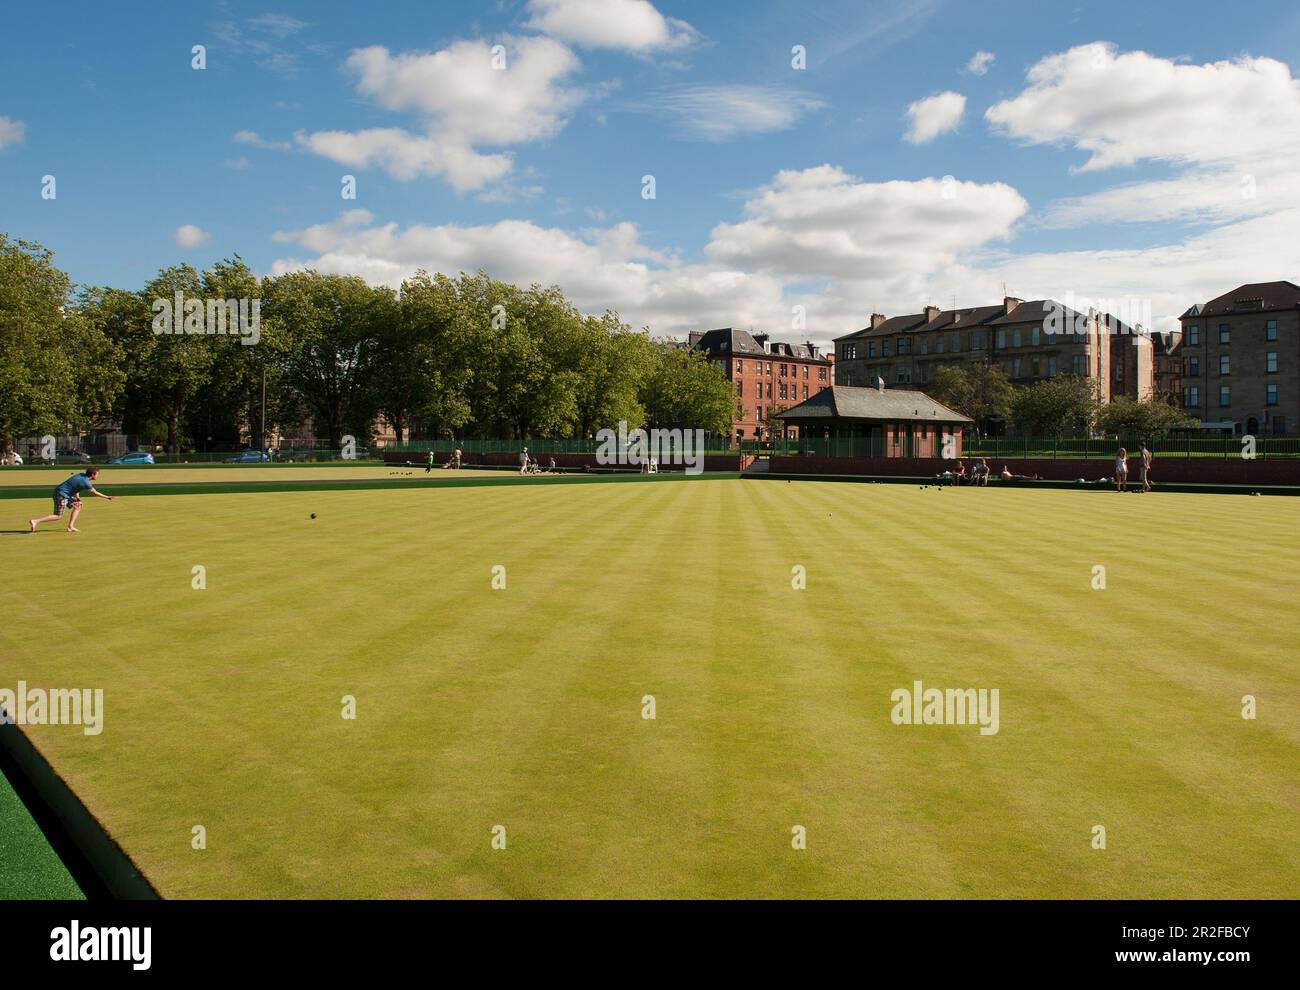 Bowls in play at the Kelvingrove lawn bowling green in Glasgow, Scotland, UK Stock Photo